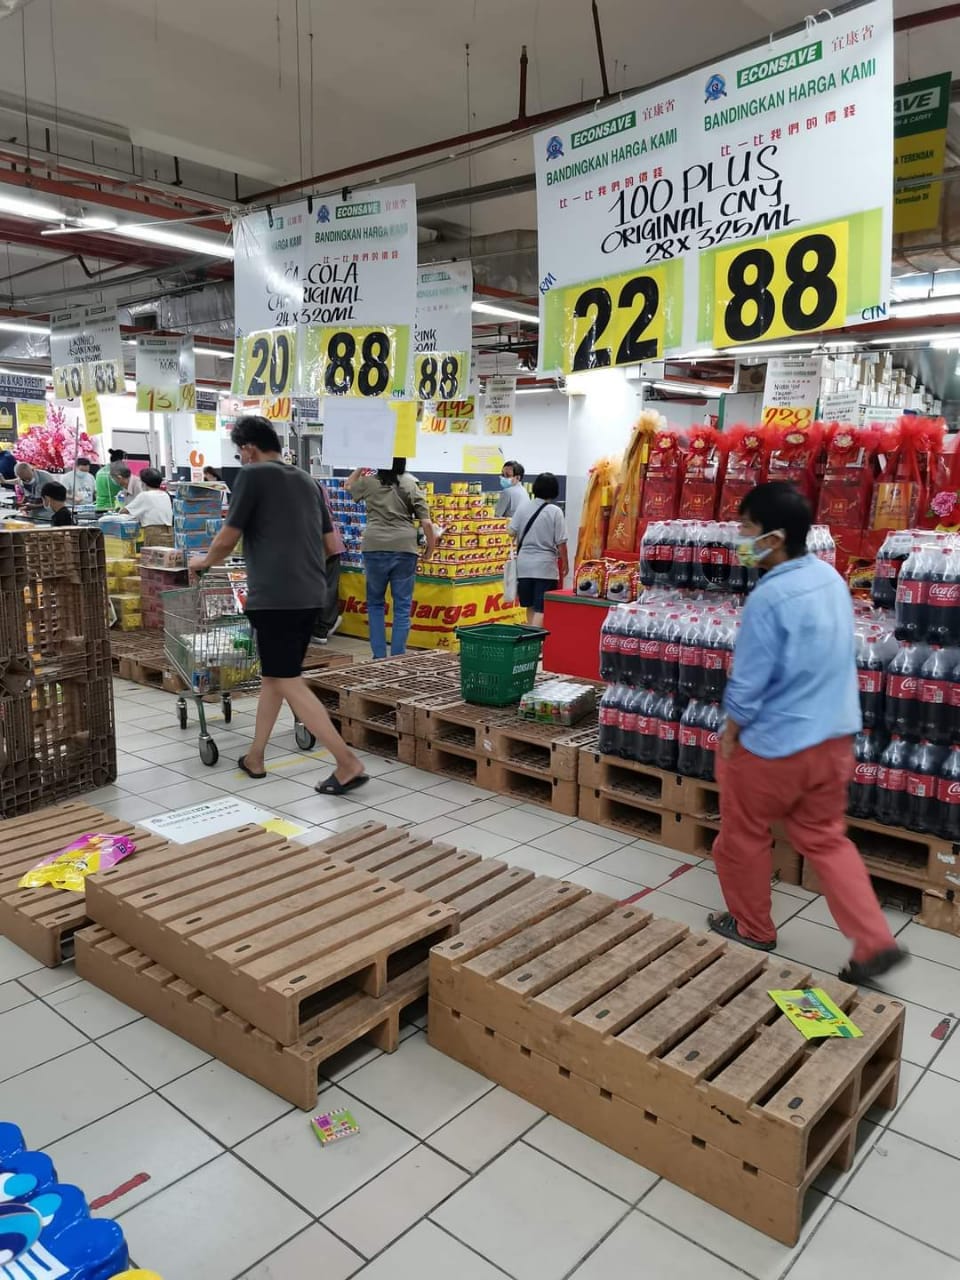 [video] mana social distancing? Econsave's soft drinks sale turns into chaotic snap up | weirdkaya